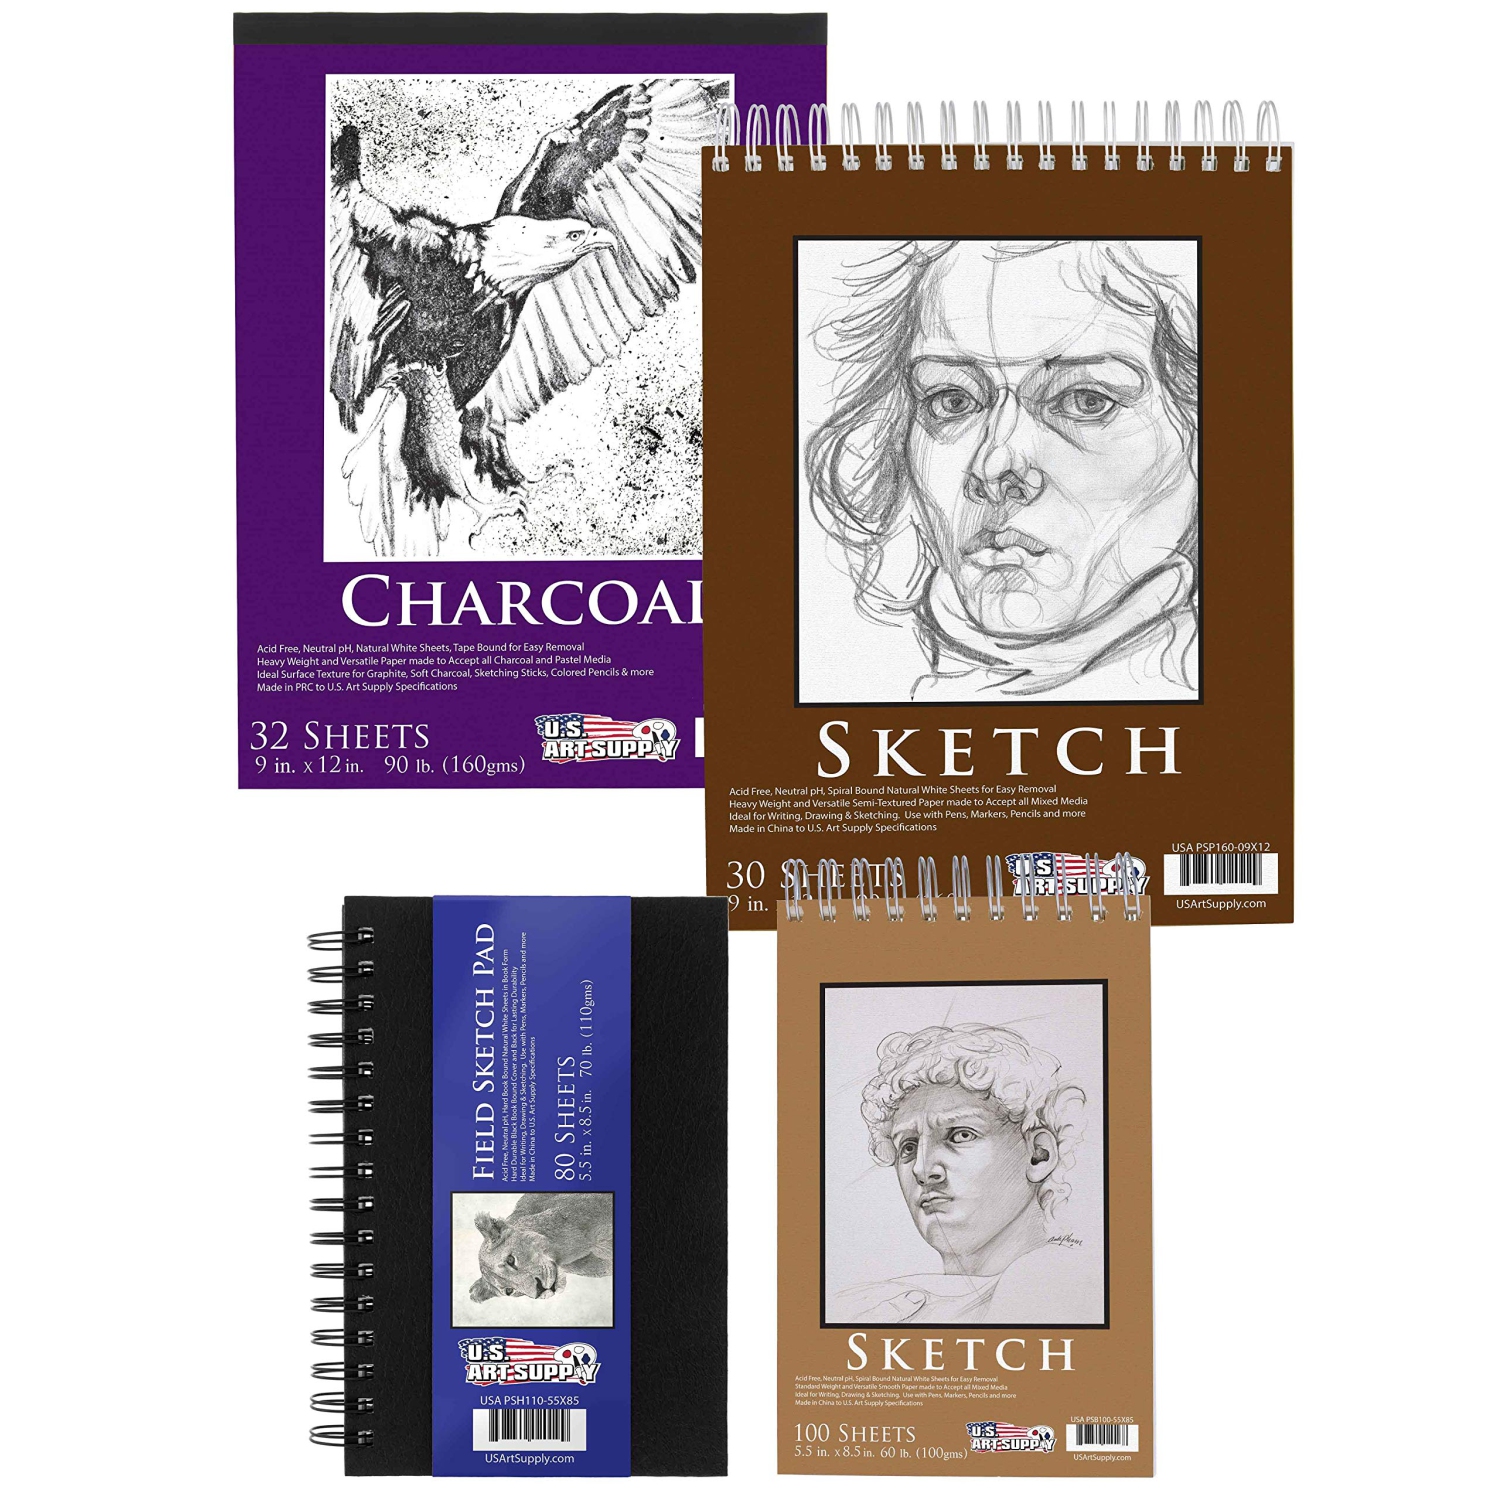 Premium Sketching and Drawing Paper Pads - Set of 4 Styles (242 Sheets) - Spiral Bound Sketch, Draw, Charcoal Pencil, Mixed Media Pads - 5.5" x 8.5" and 9" x 12" Sizes